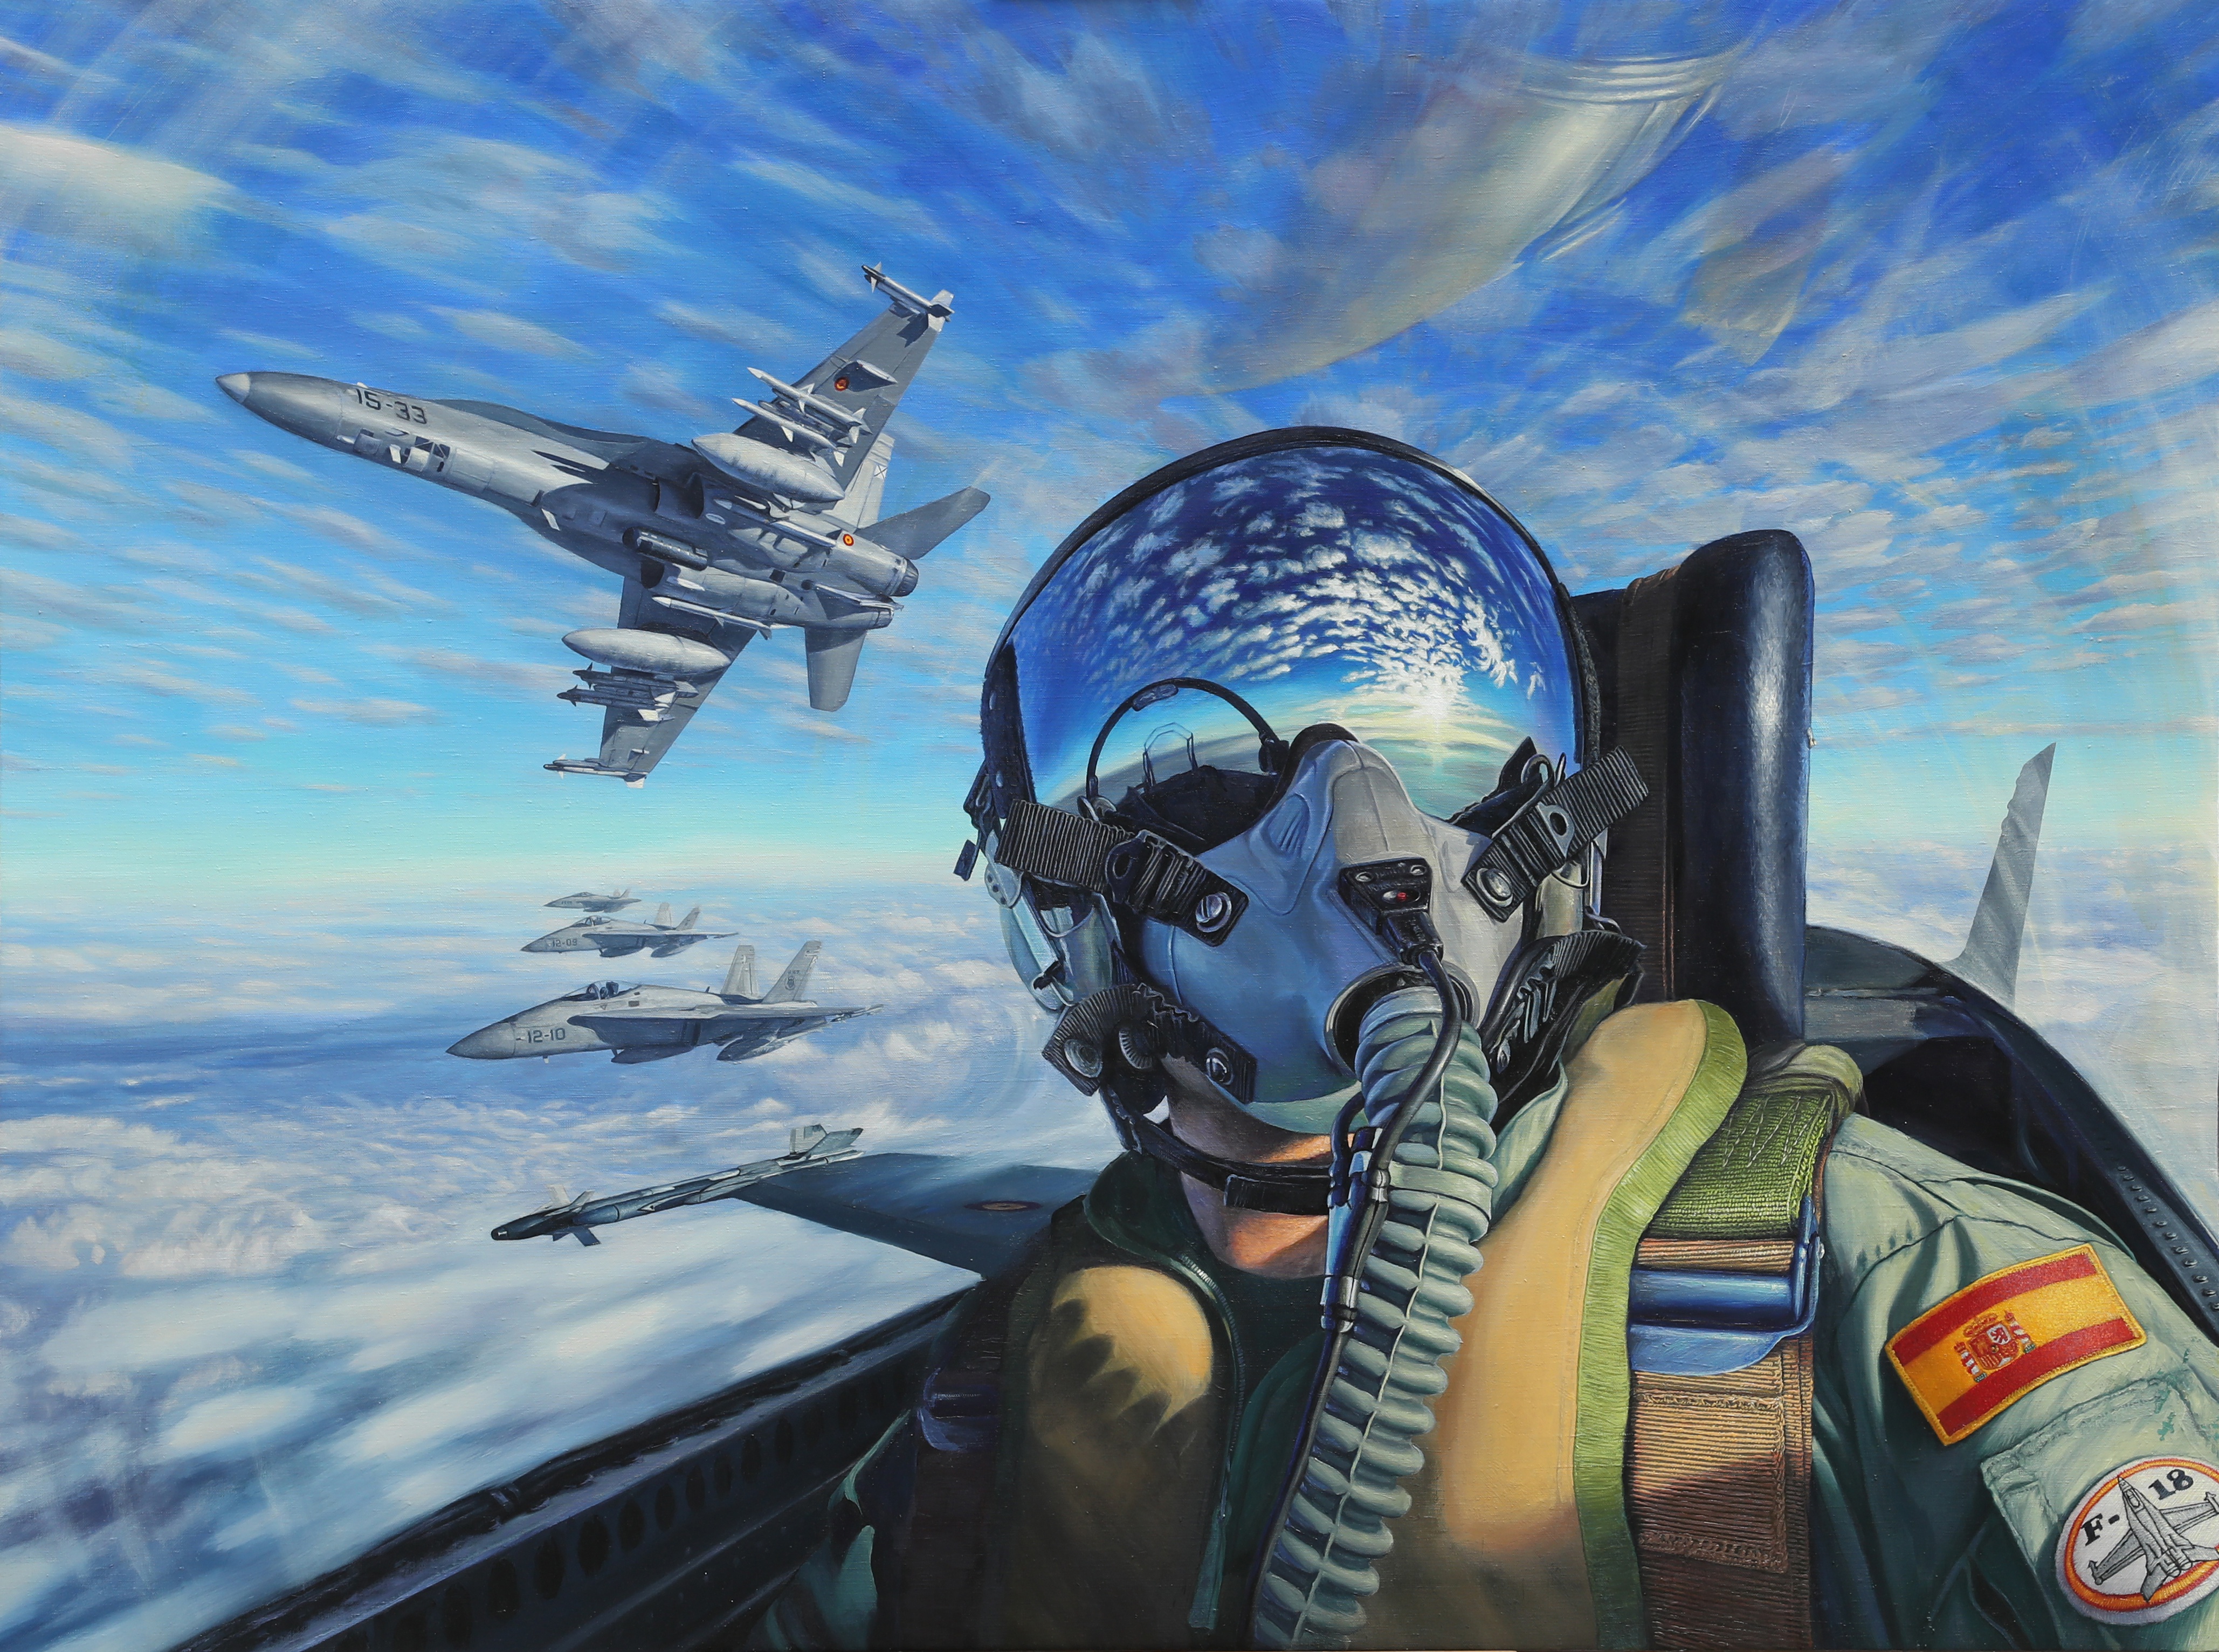 amazing wallpapers for walls,airplane,cg artwork,aircraft,pc game,air force